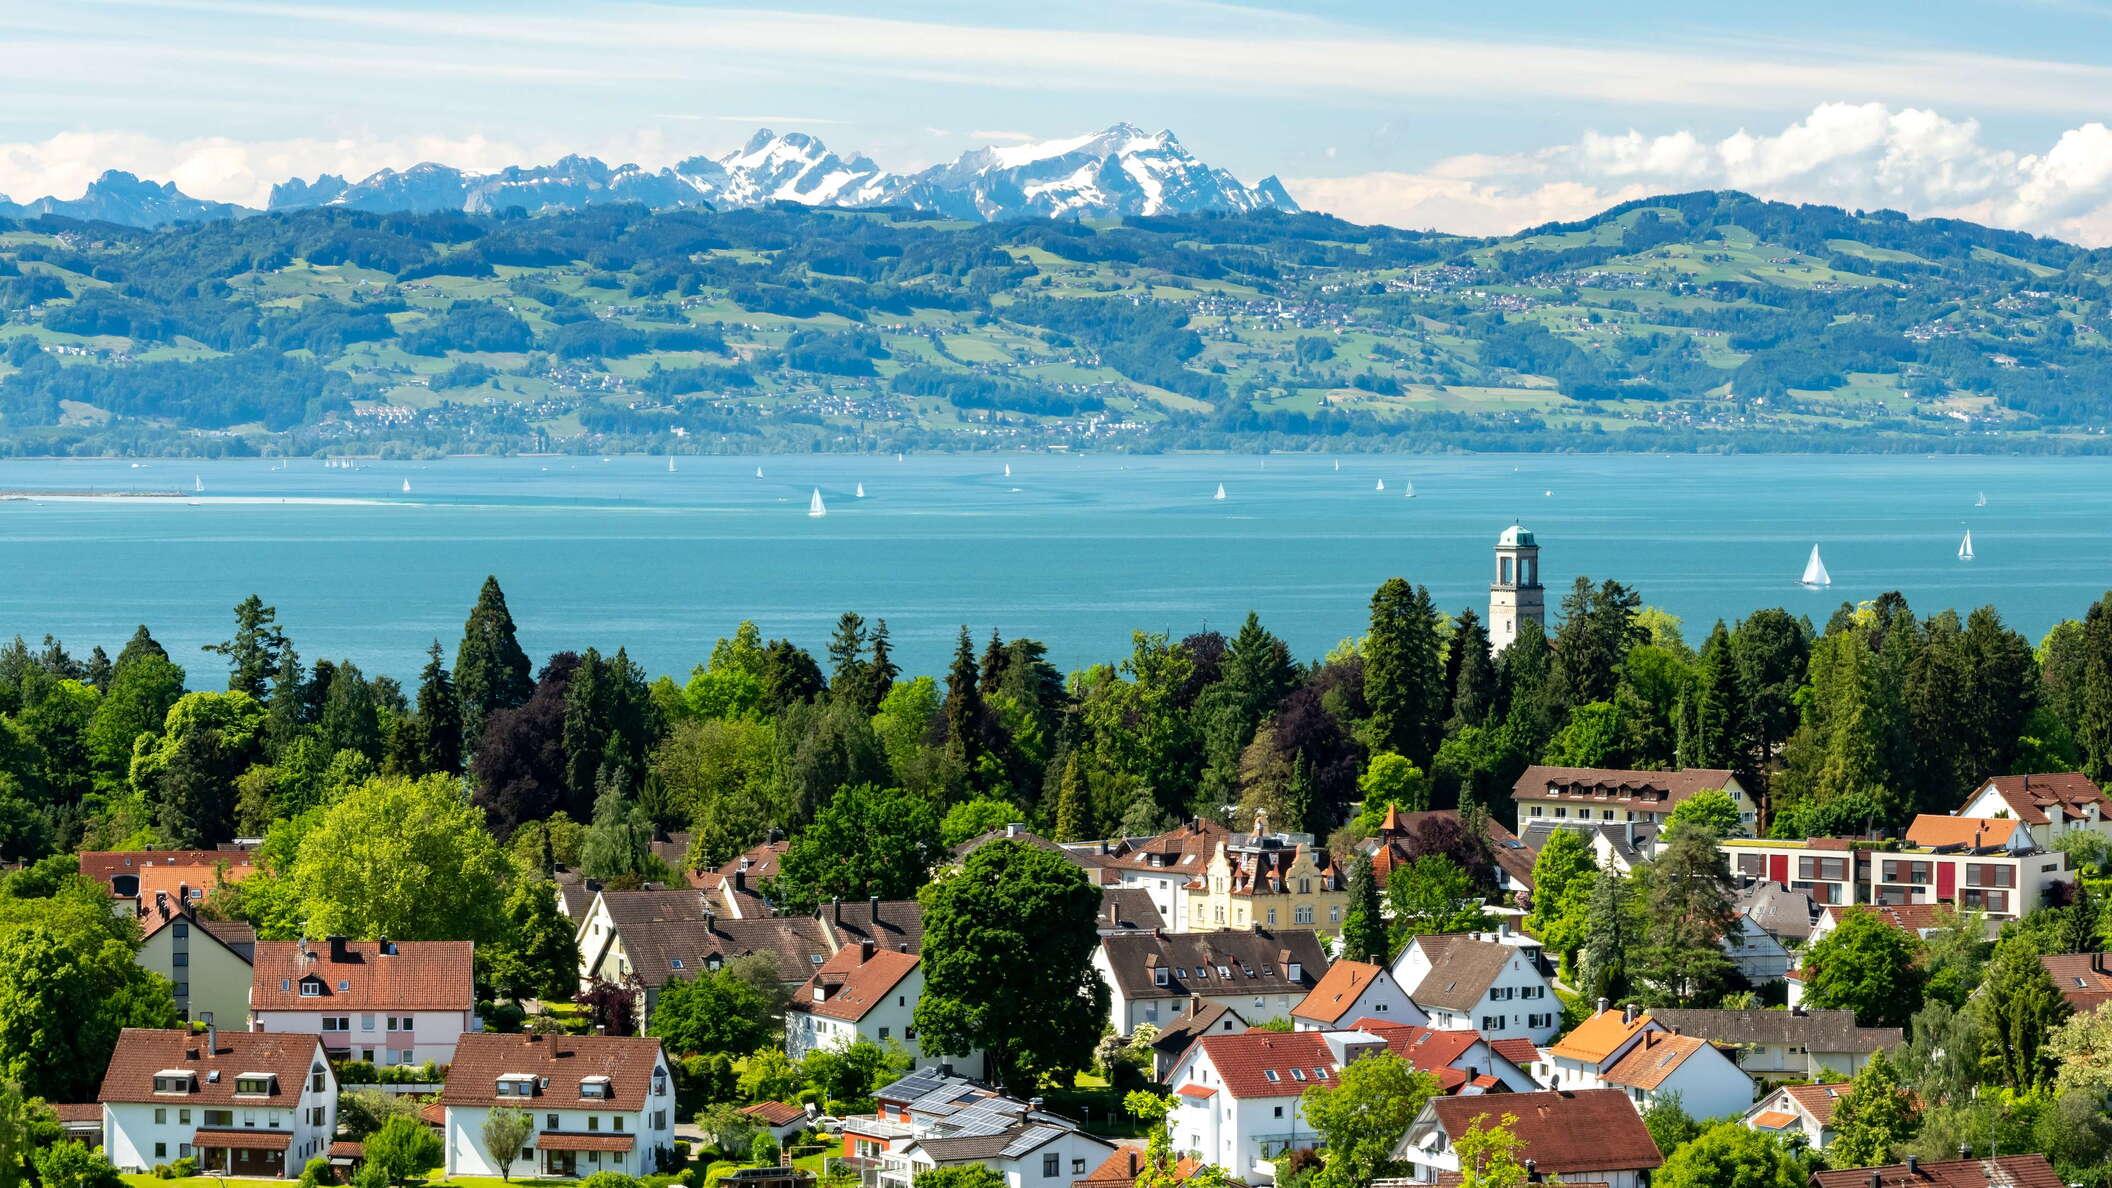 Bad Schachen with Bodensee and Säntis